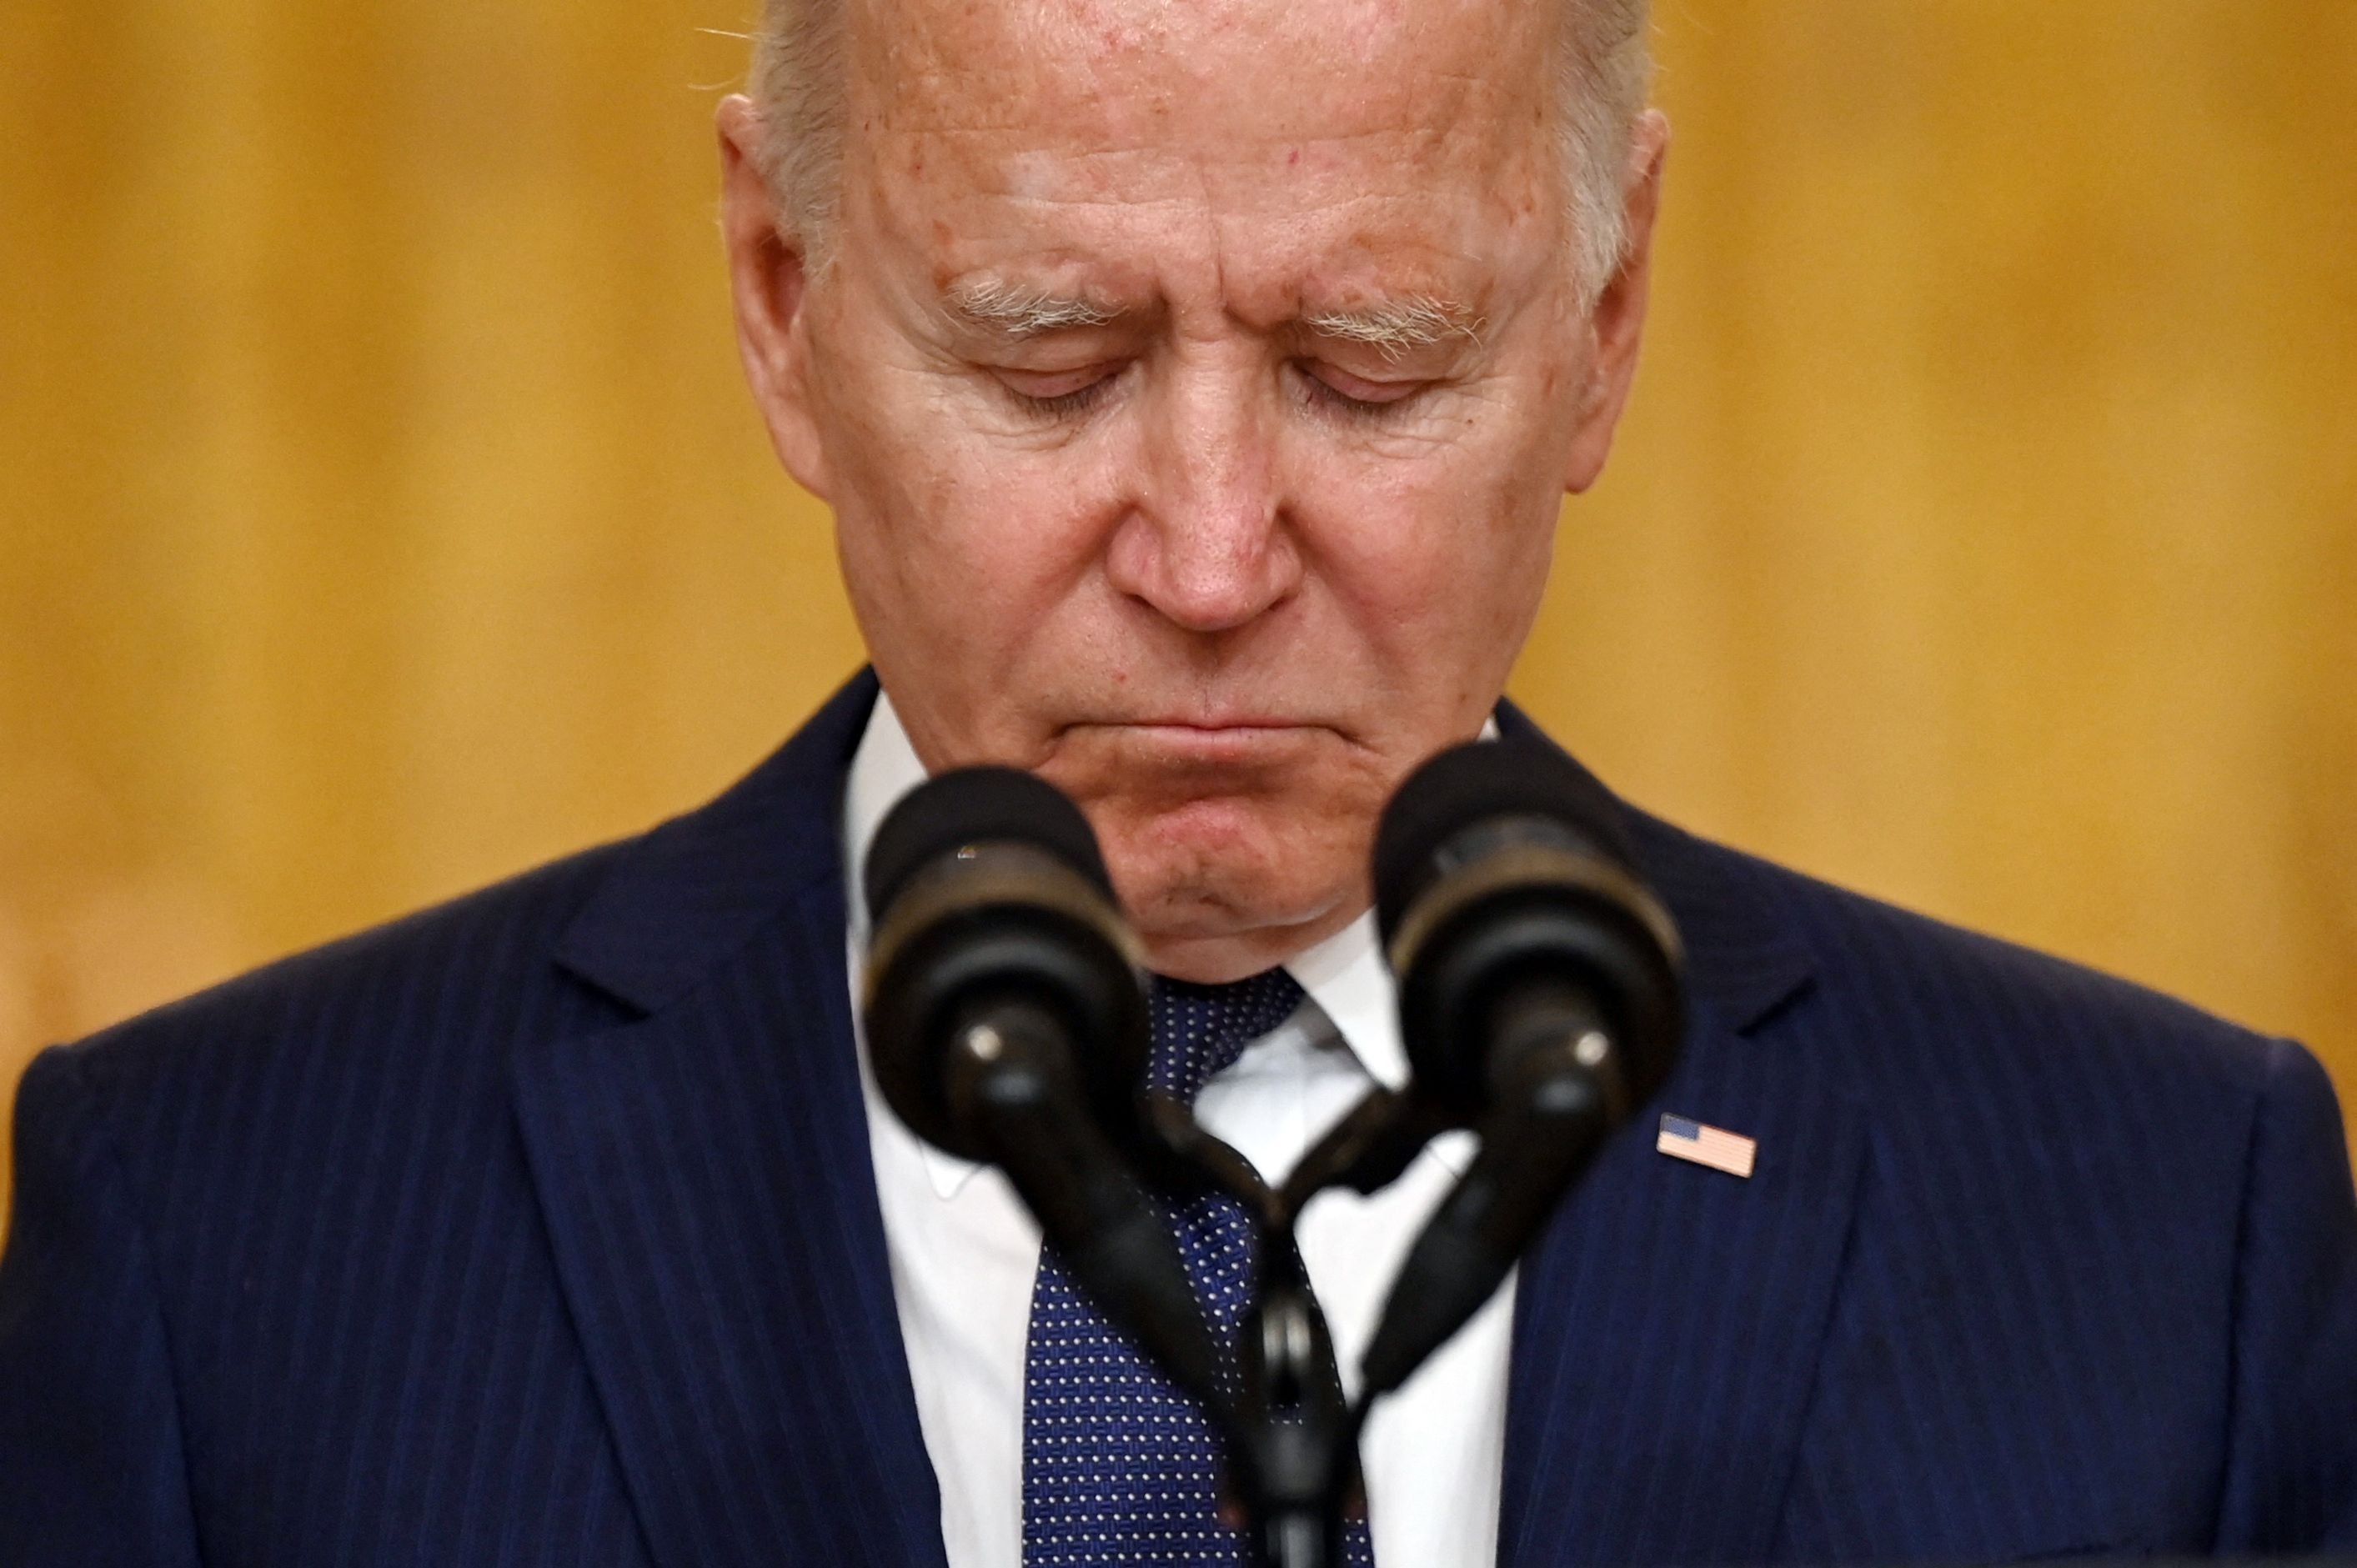 President Biden, defending his decision to cut and run in Afghanistan